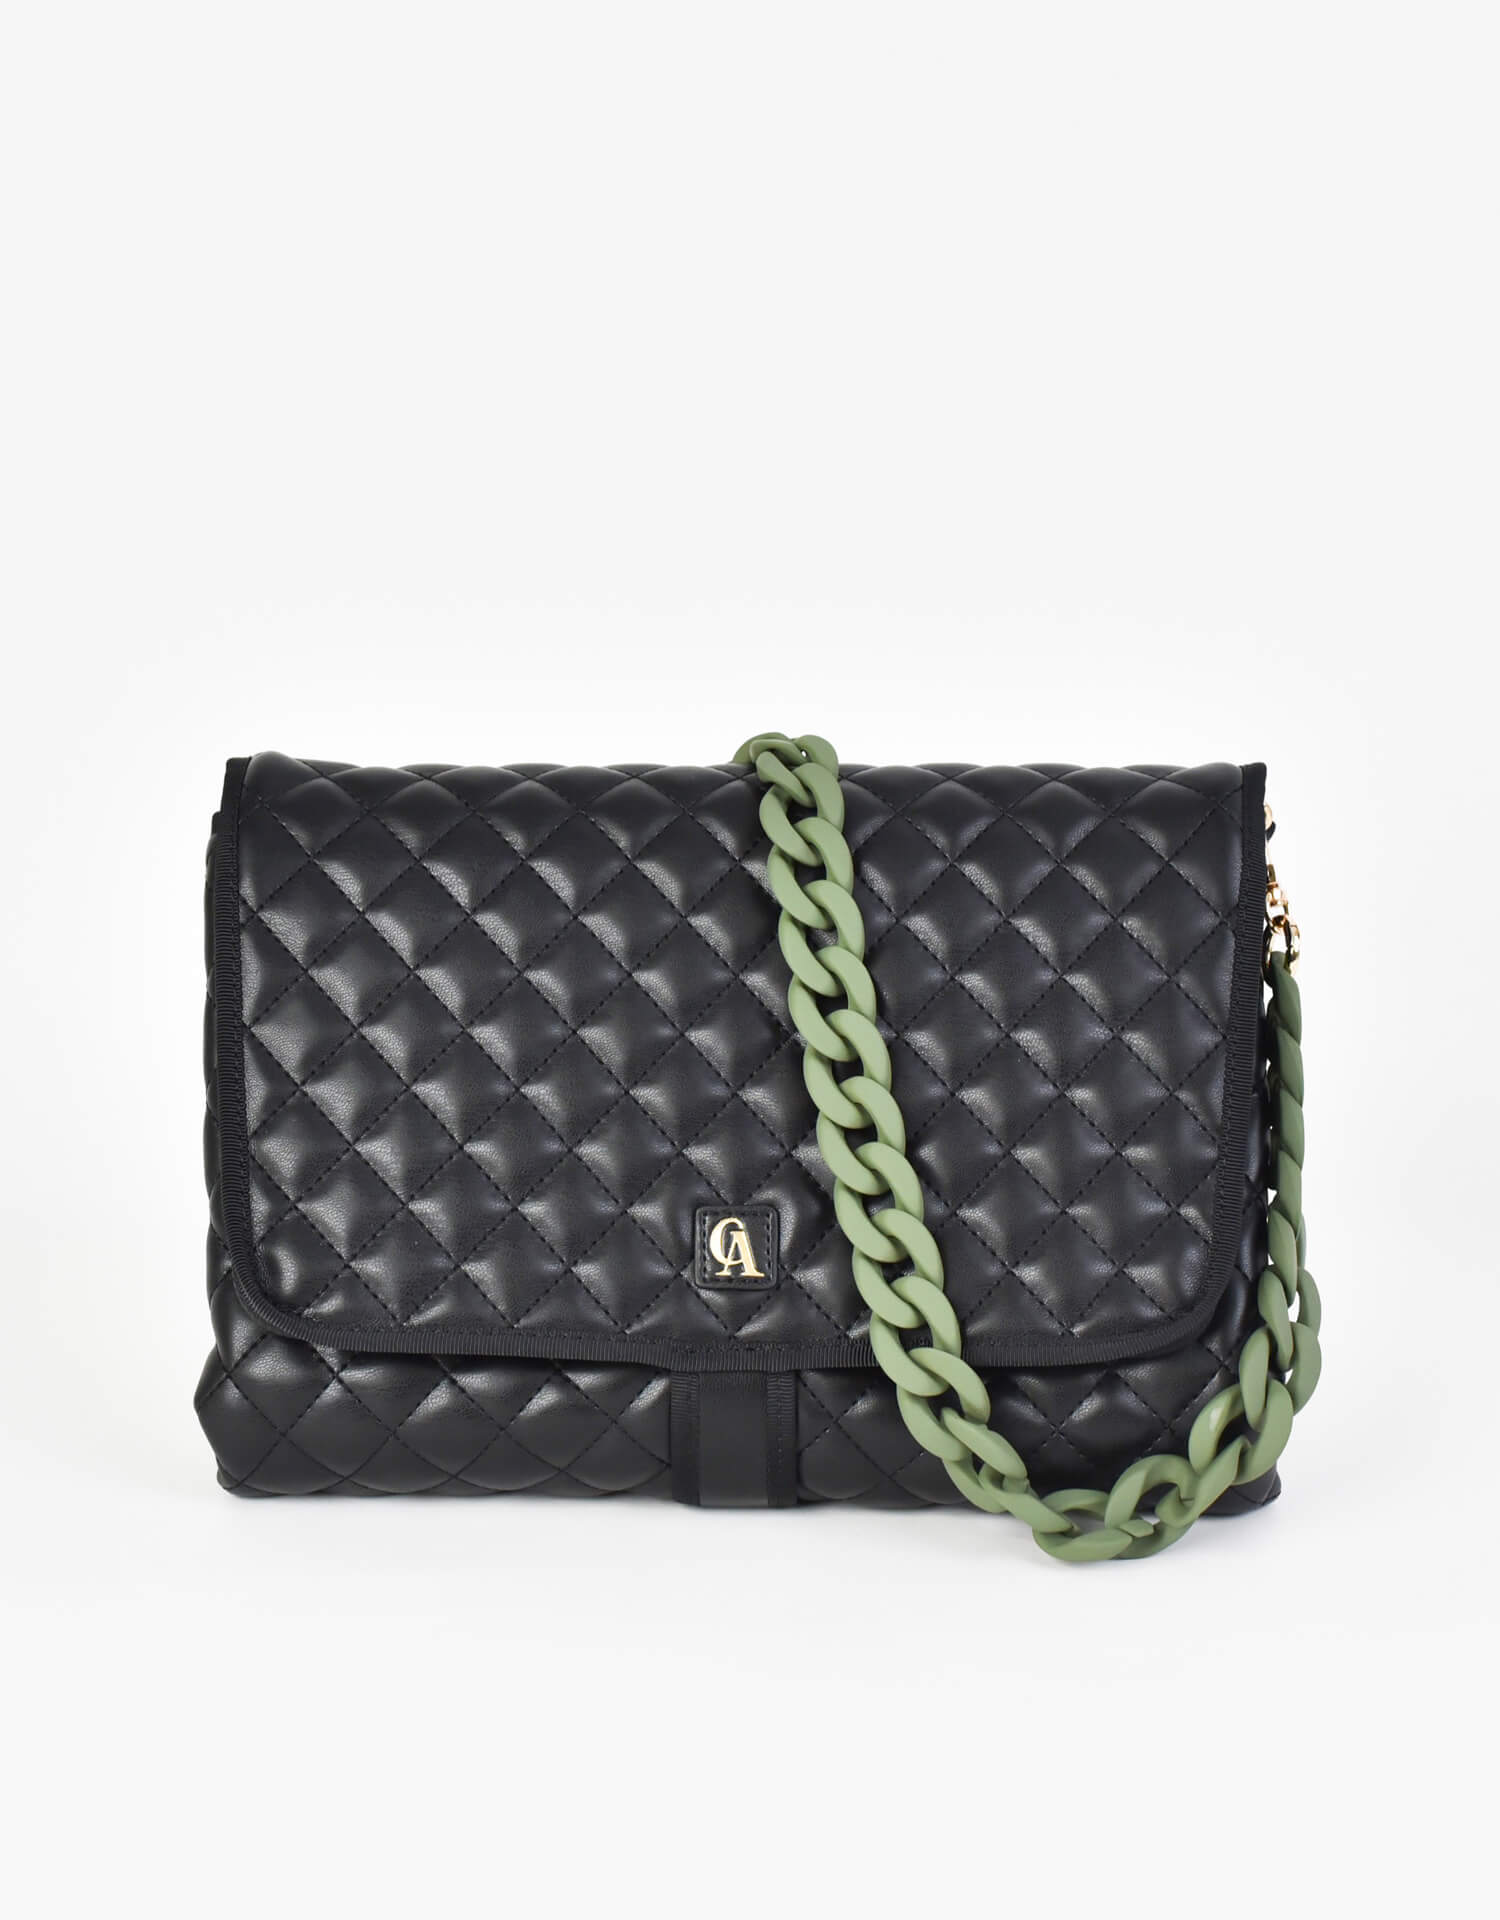 coco alexander green coated chain straps